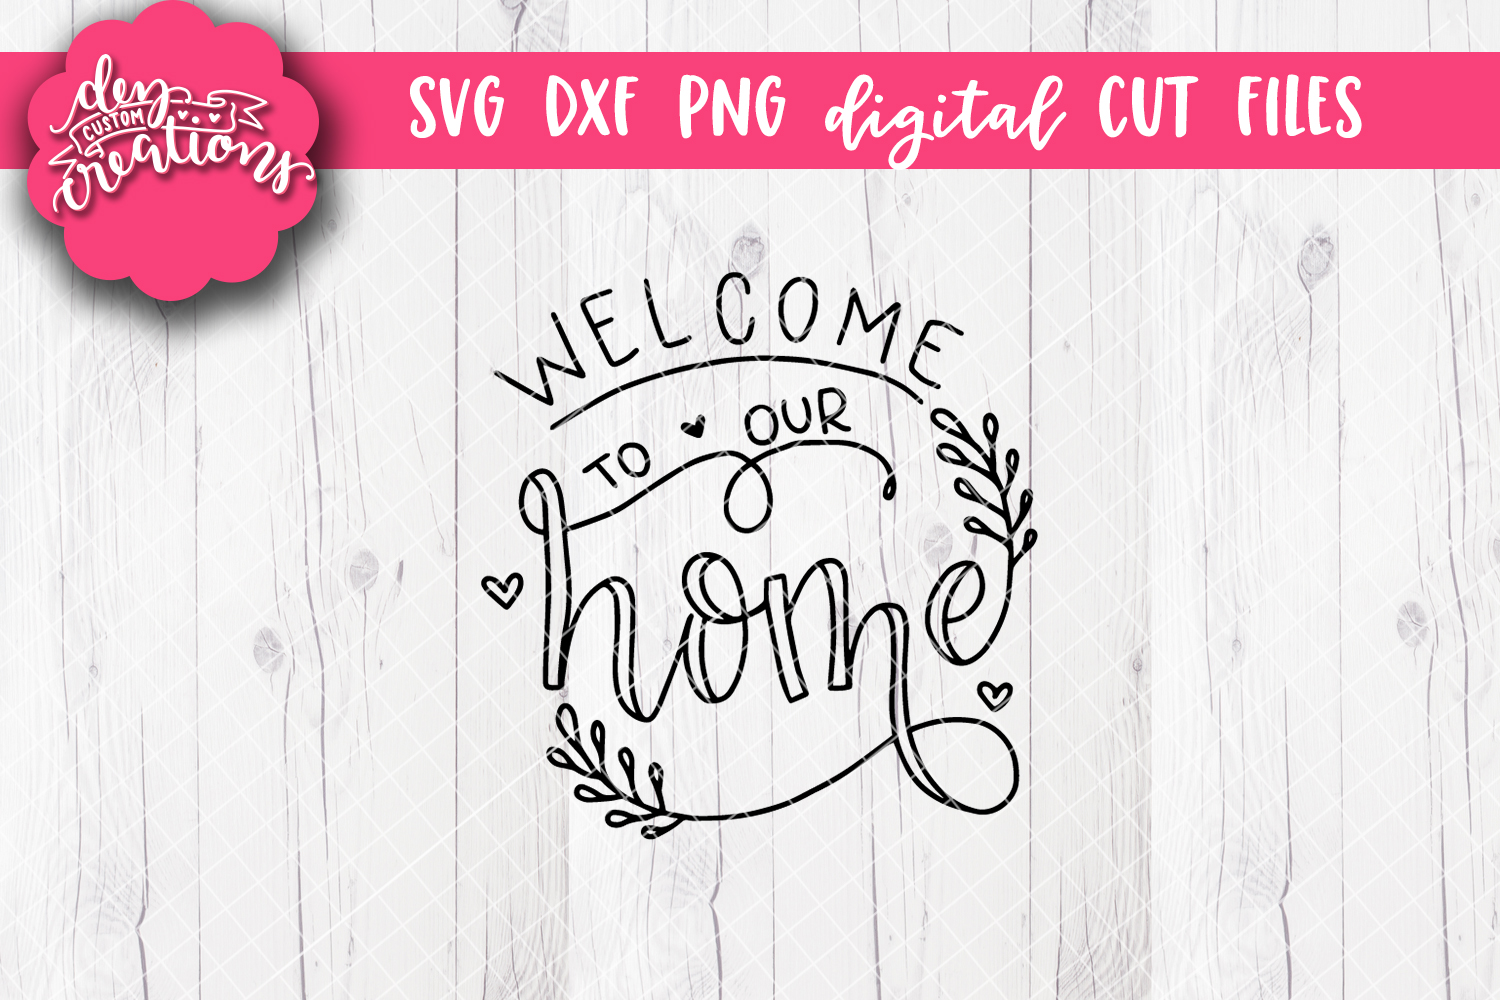 Welcome To Our Home - SVG - DXF - PNG Cut Files handlettered